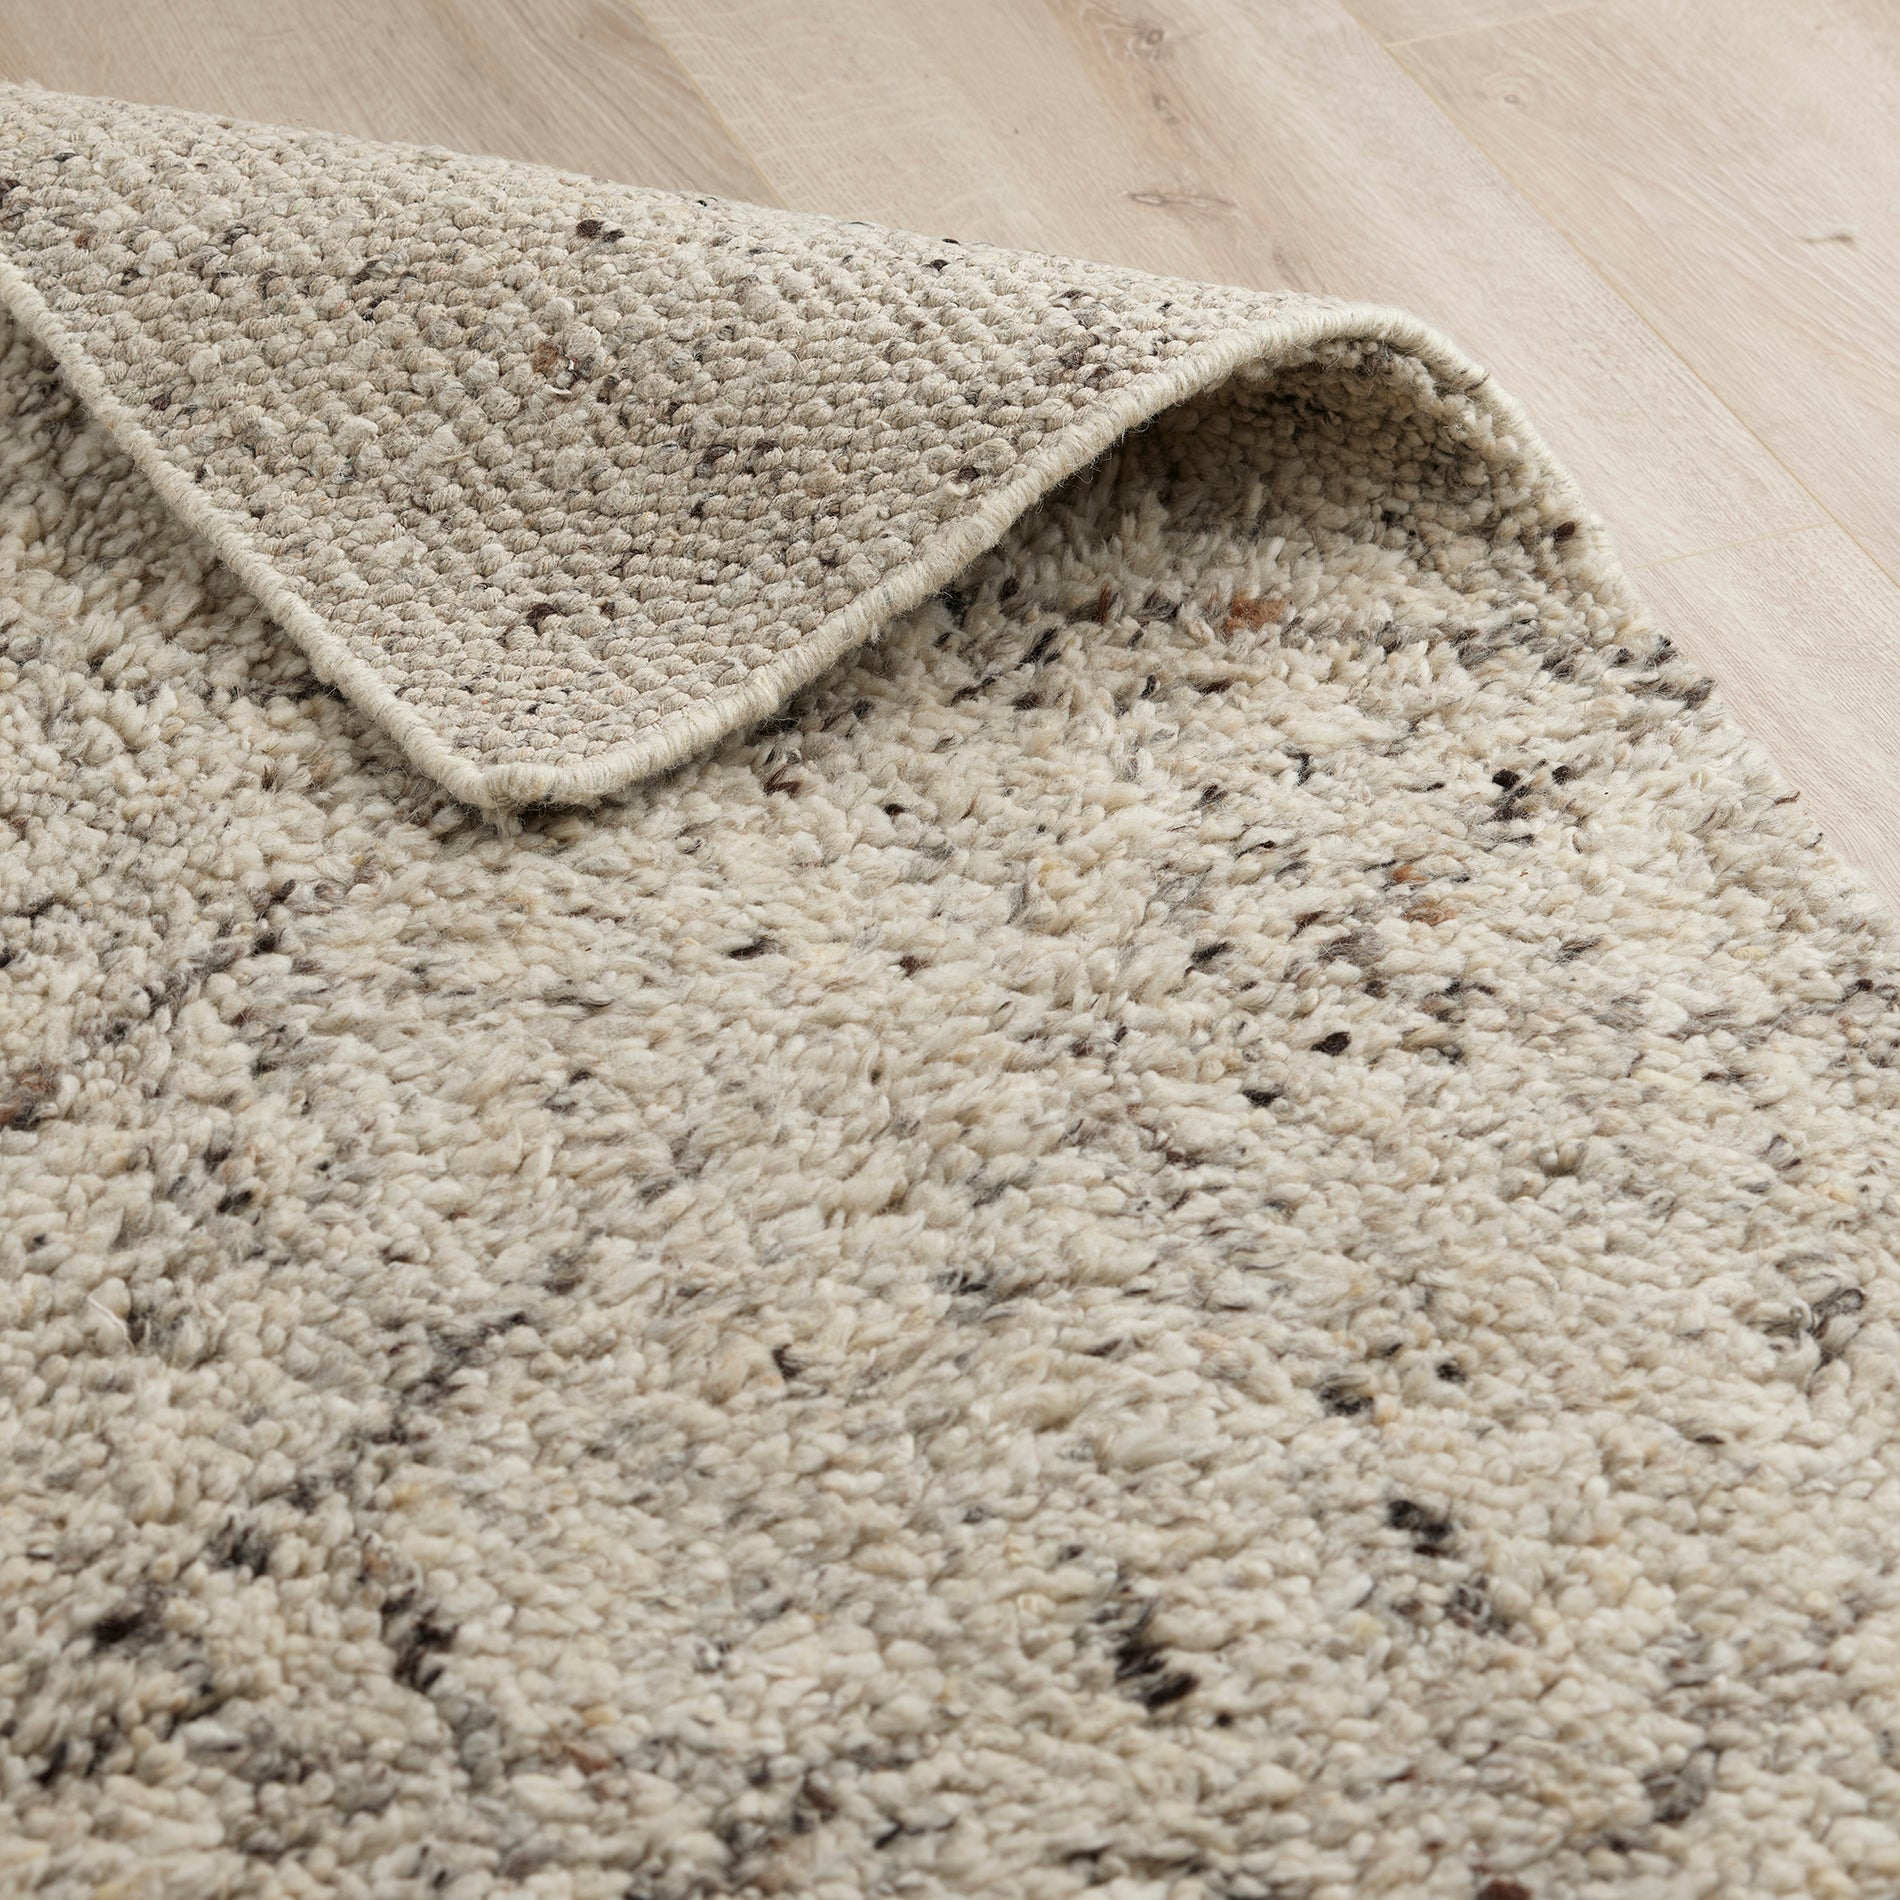 Natural_Forres_Handknotted_Shaggy_Wool_Cream_Grey_Rug_Industville_RG-24-HKSW-CR-GR_Fold